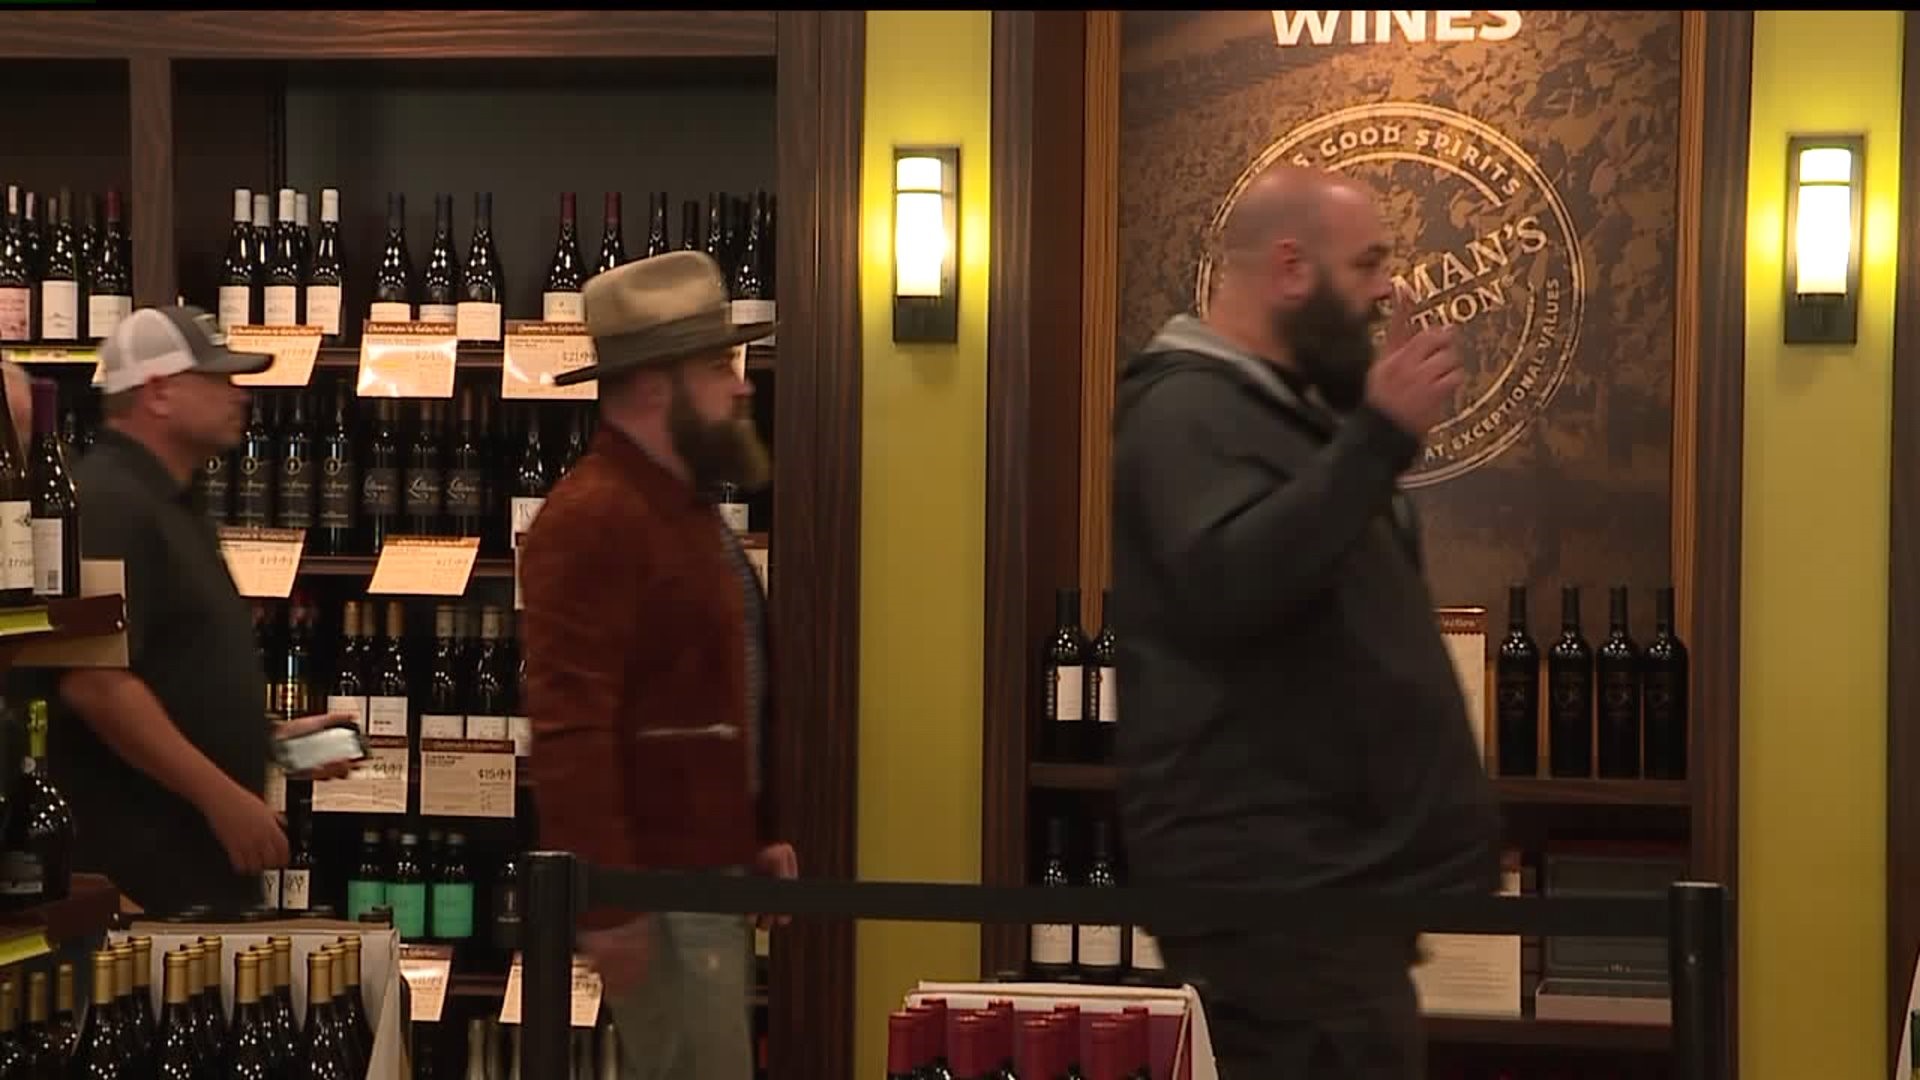 Fans line up to meet singer Zac Brown at wine store in Dauphin County